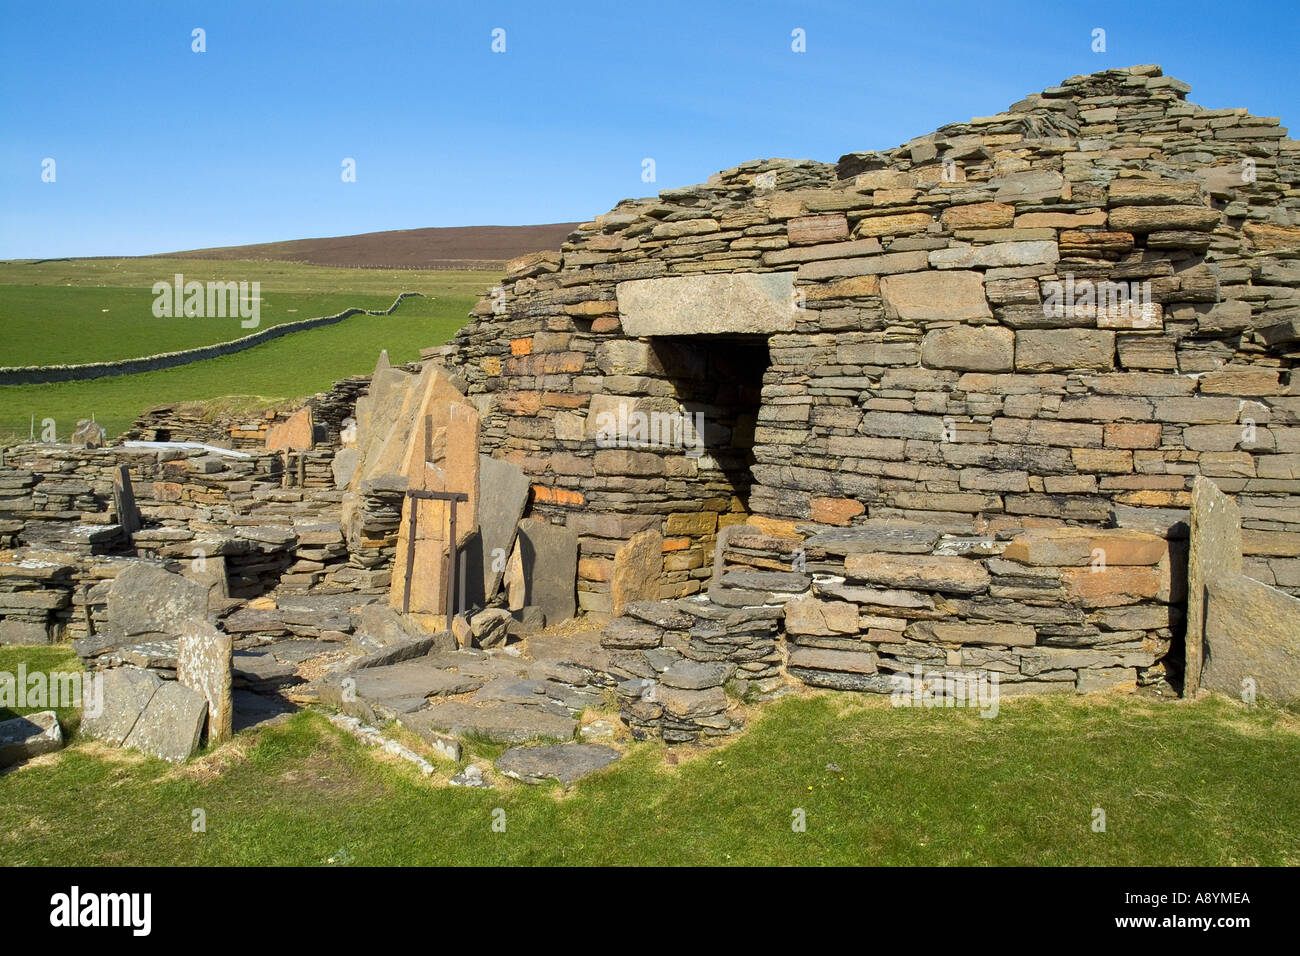 dh Midhowe Broch ROUSAY ORKNEY Iron age fortified defensive dwelling entrance prehistoric stone ruin scotland island heritage britain ancient Stock Photo